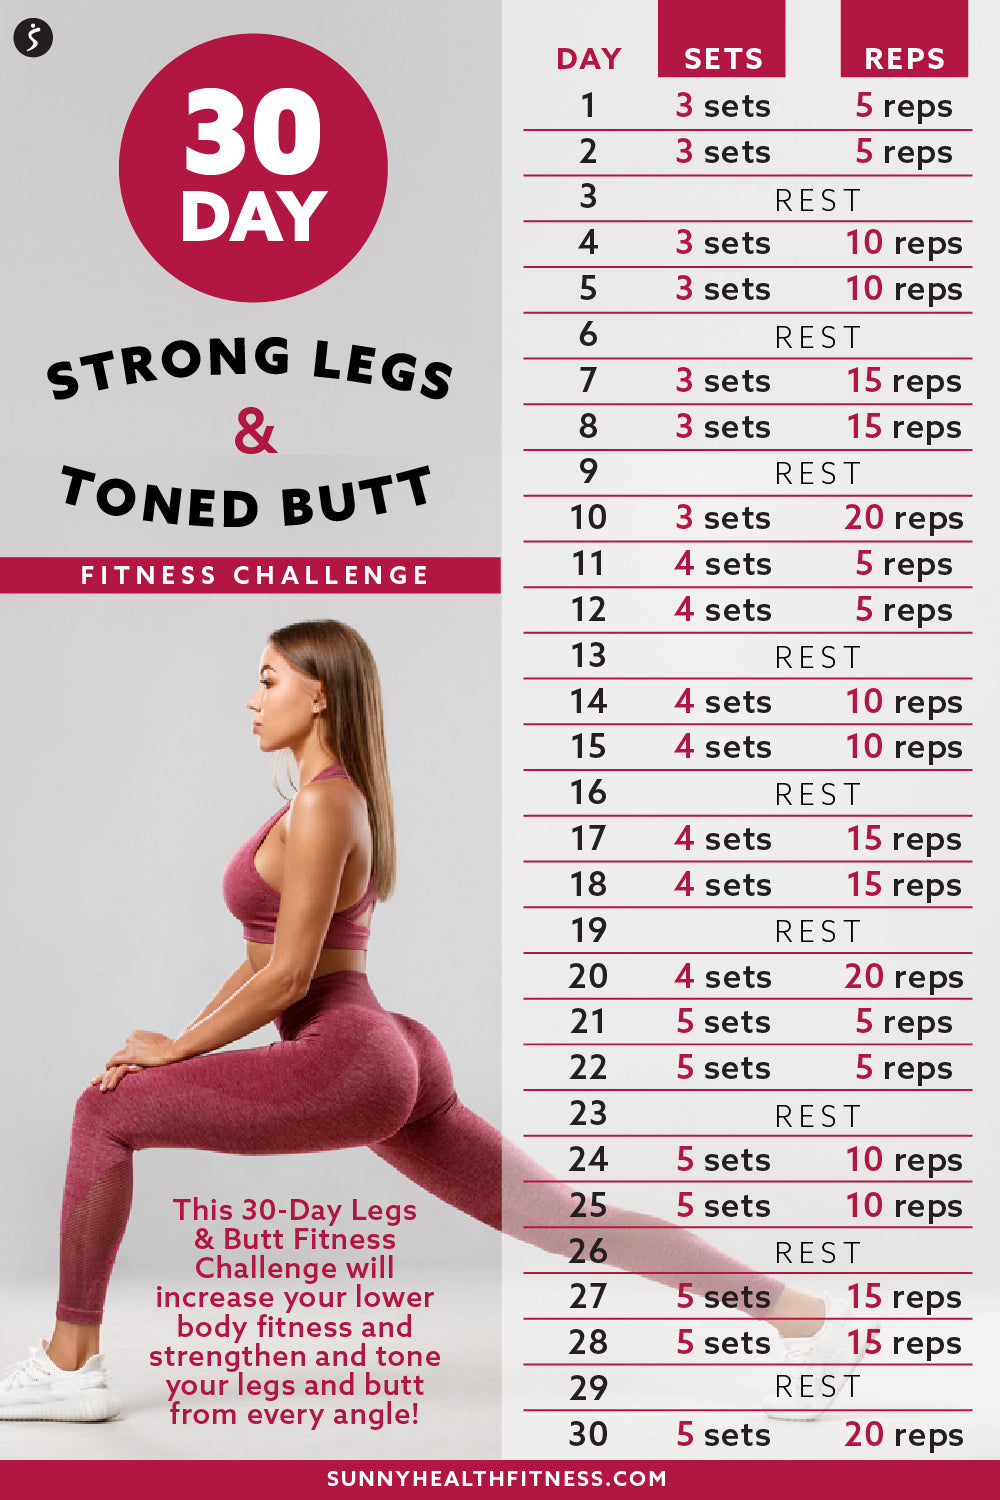 30 Day Strong Legs & Toned Butt Fitness Challenge